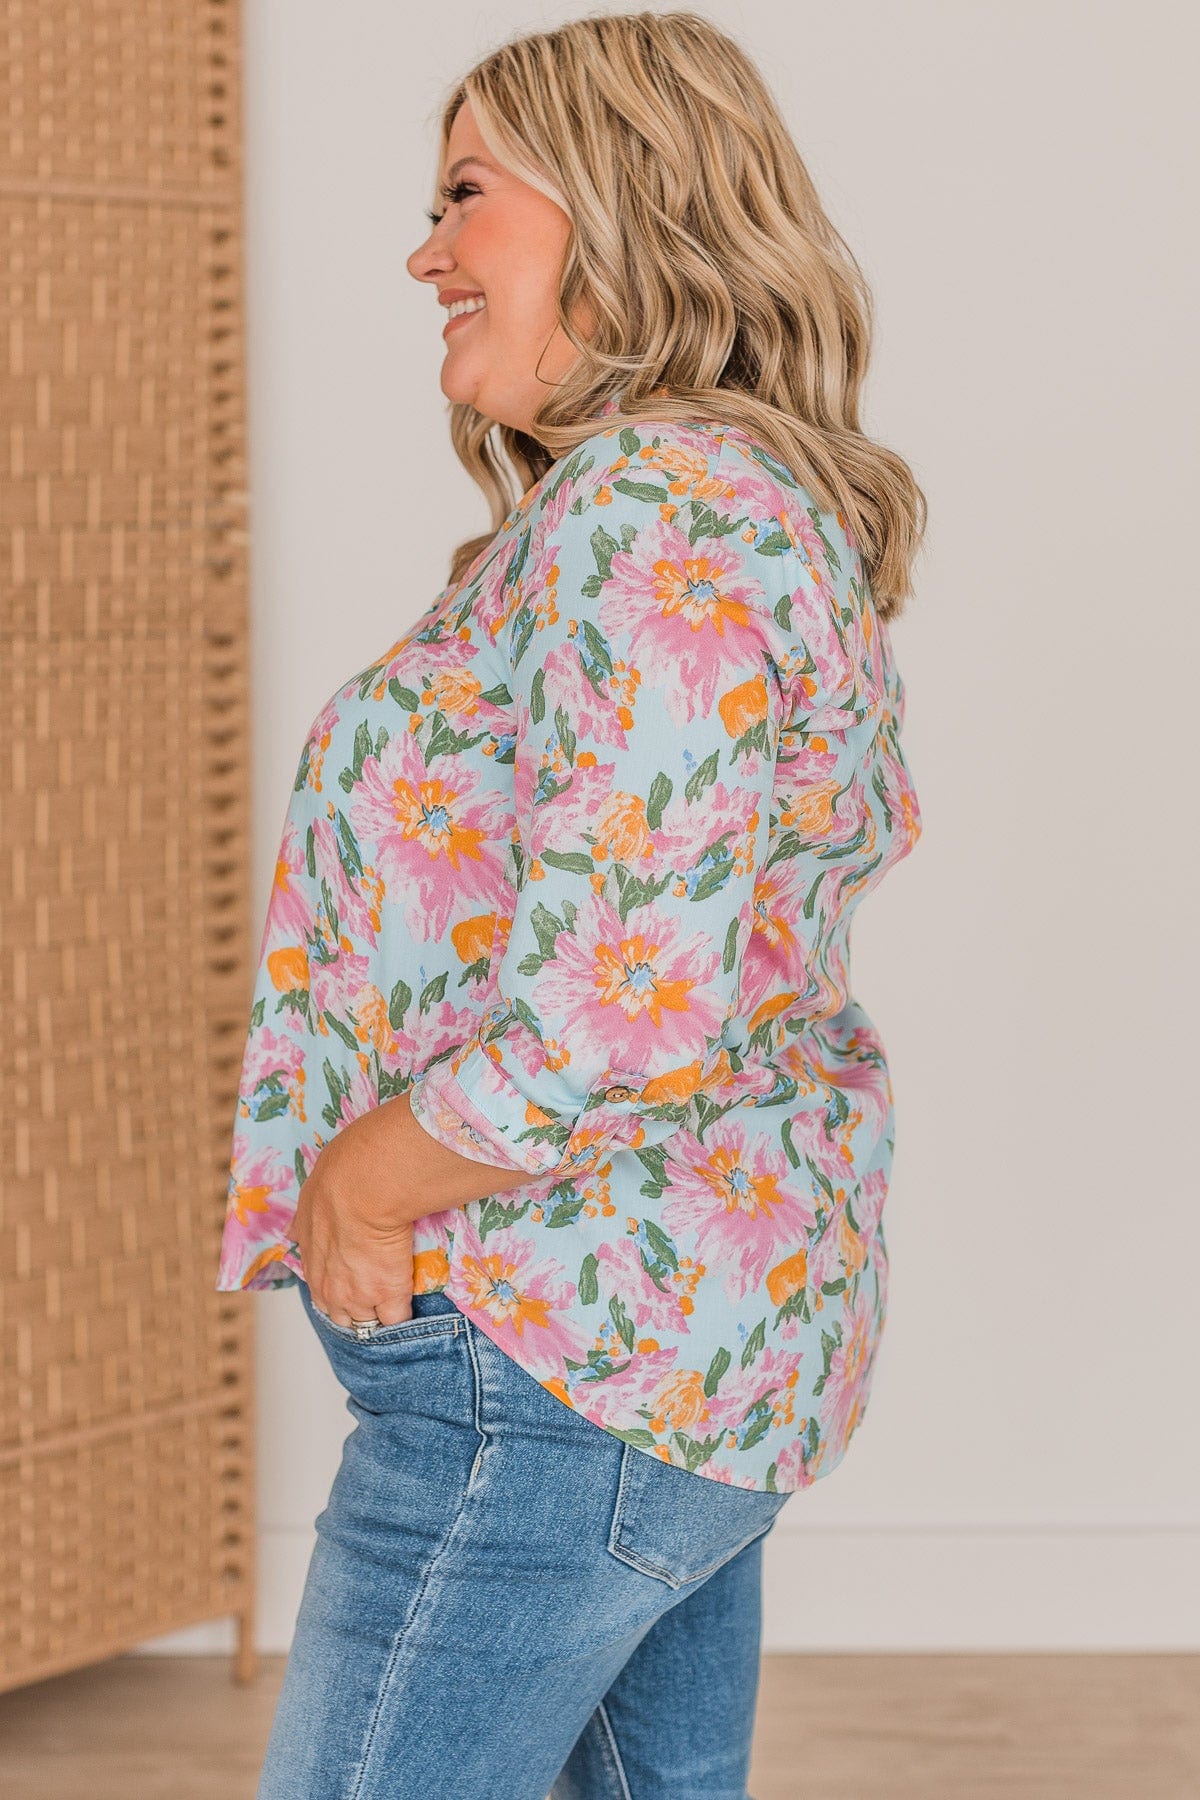 Calling My Name Floral Blouse- Light Blue & Pink